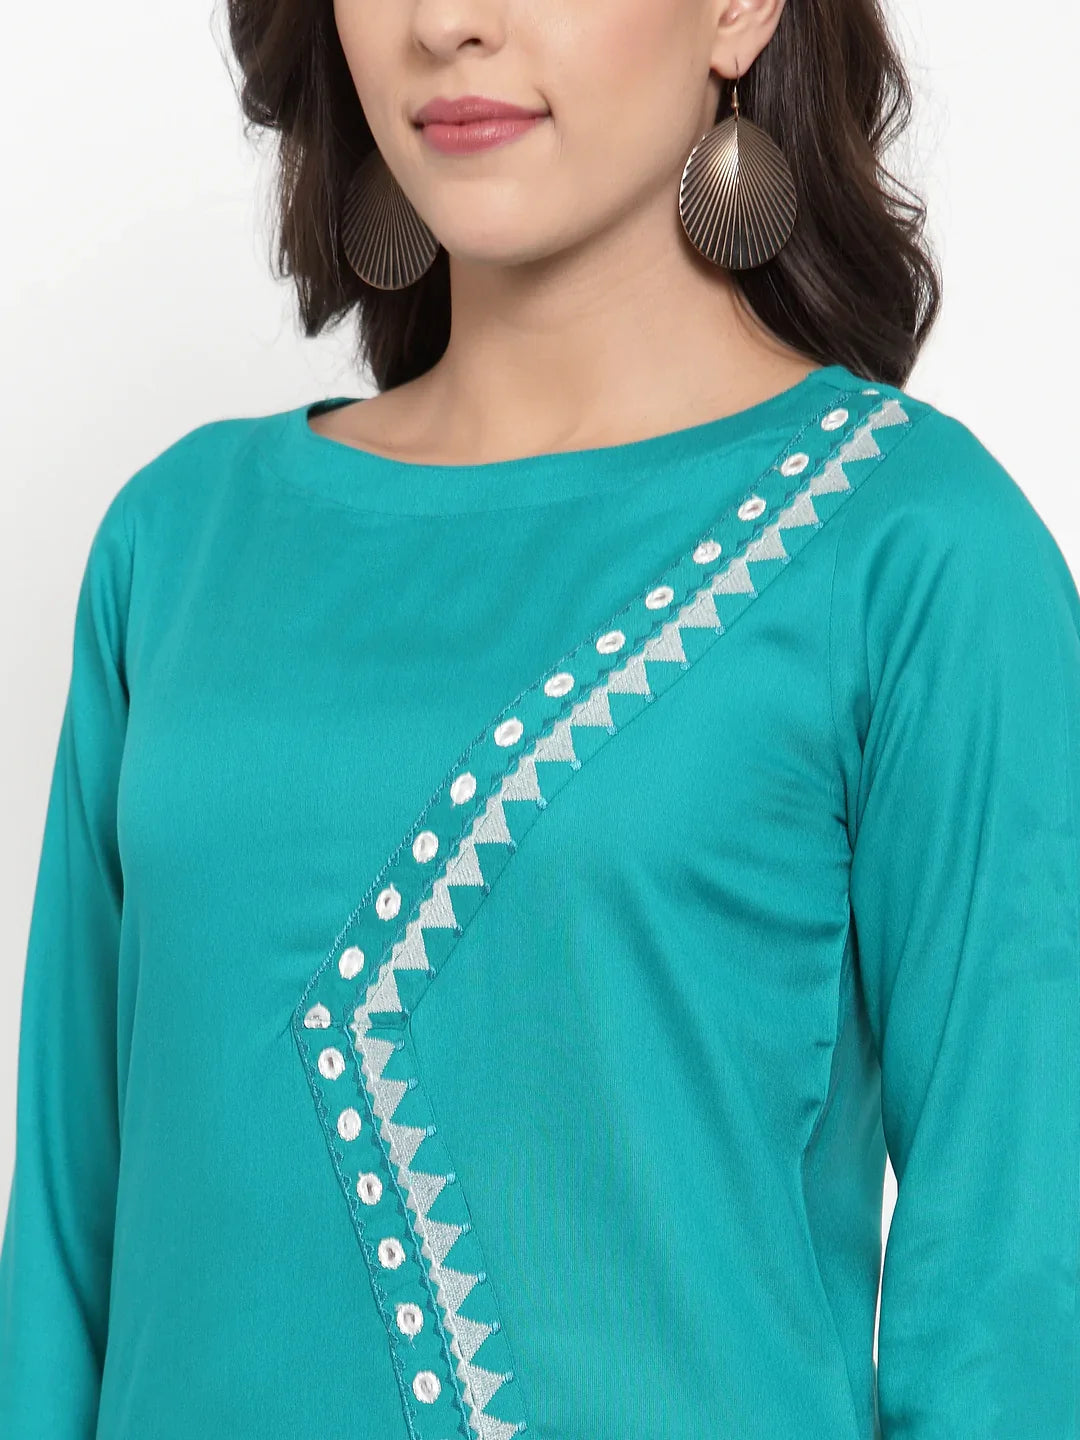 Jompers Women's Rama Green & Off-White Embroidered Kurta with Palazzos - Distacart